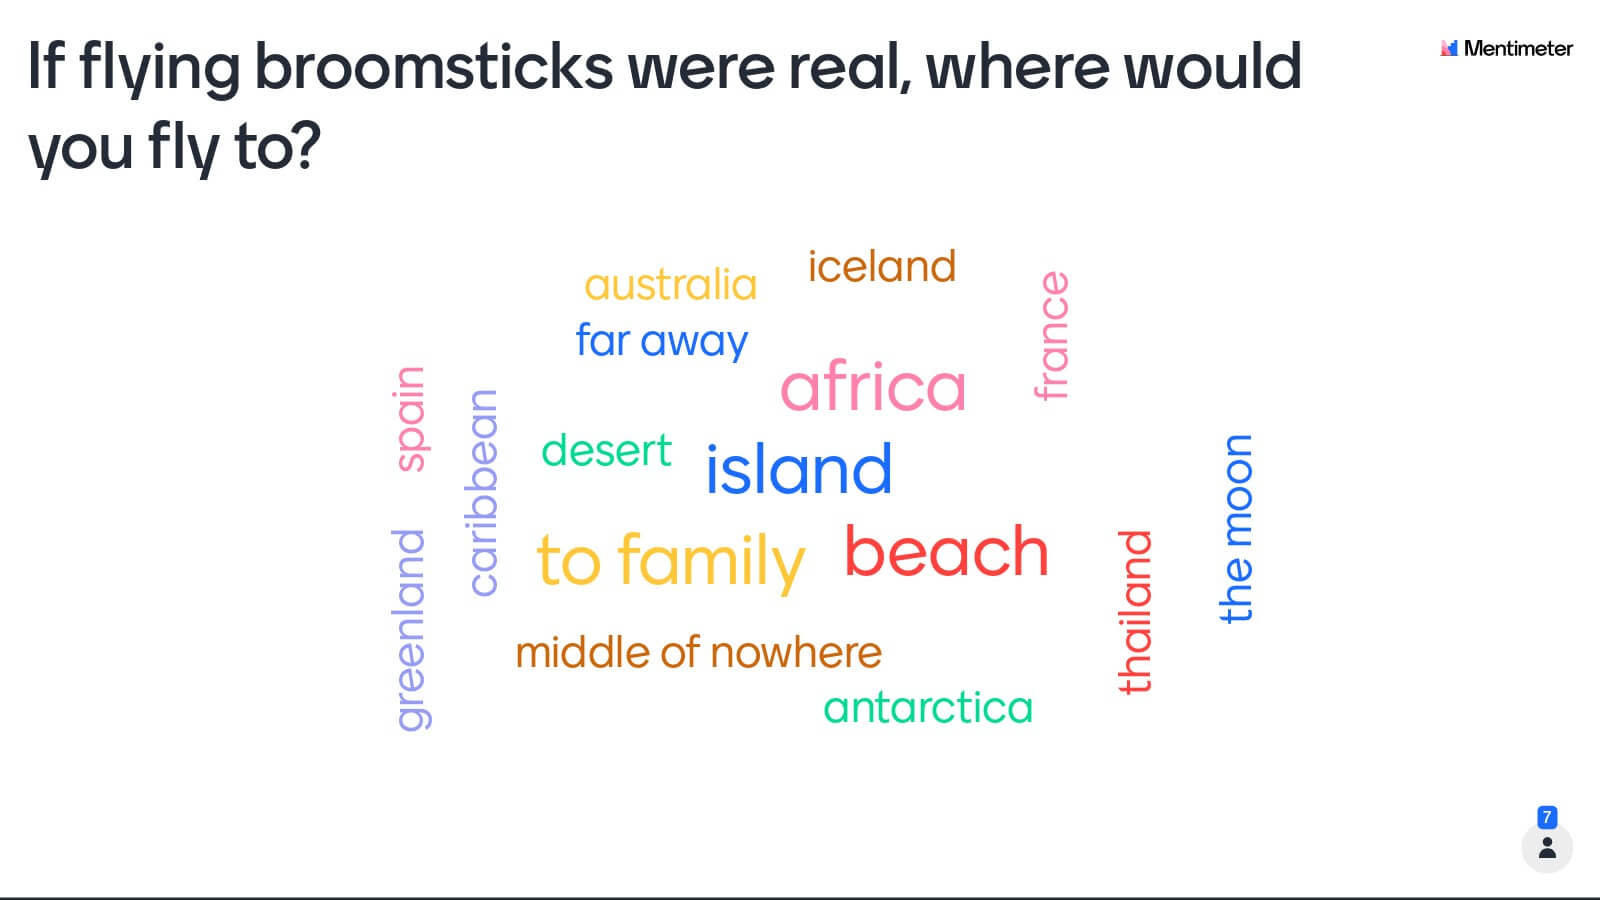 If broomsticks were real, where would you fly to?